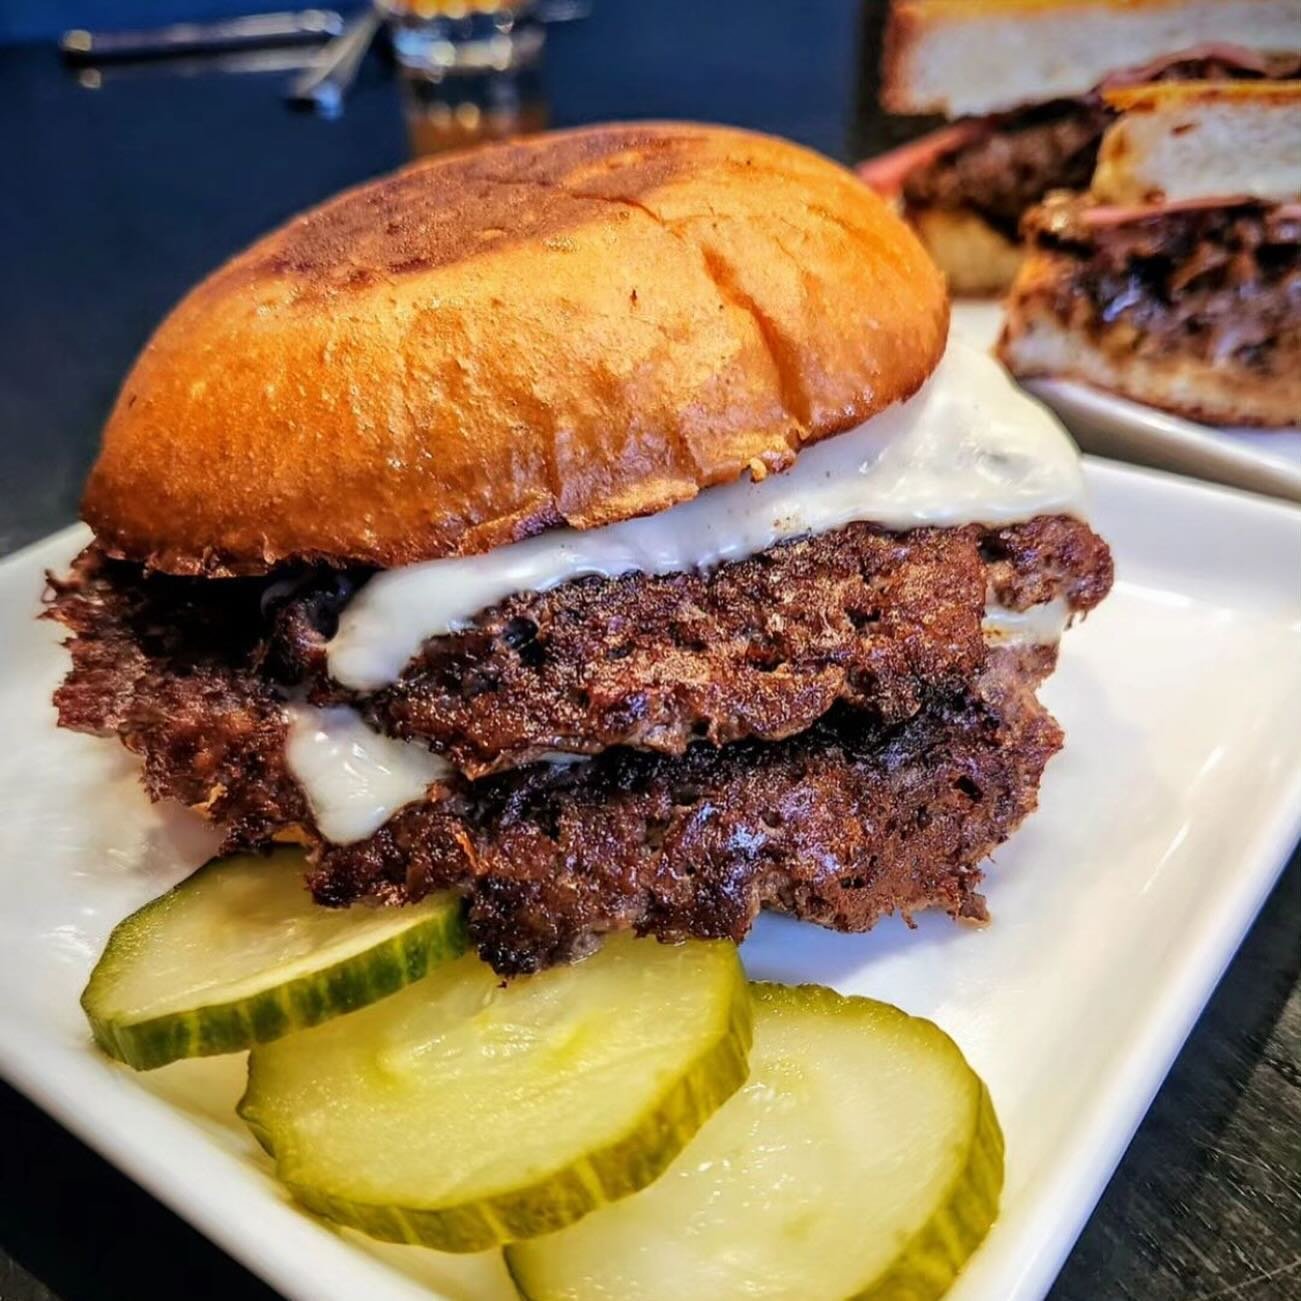 Limited Offer! Save $5 - 🎟️ Buy a ticket + 🍔Parlour Burger. Regular price is $12 for the best burger in uptown! 😋 Exclusively available for online purchases @greenroommpls @parlourbarstp - TIX in bio! TONIGHT 4/20